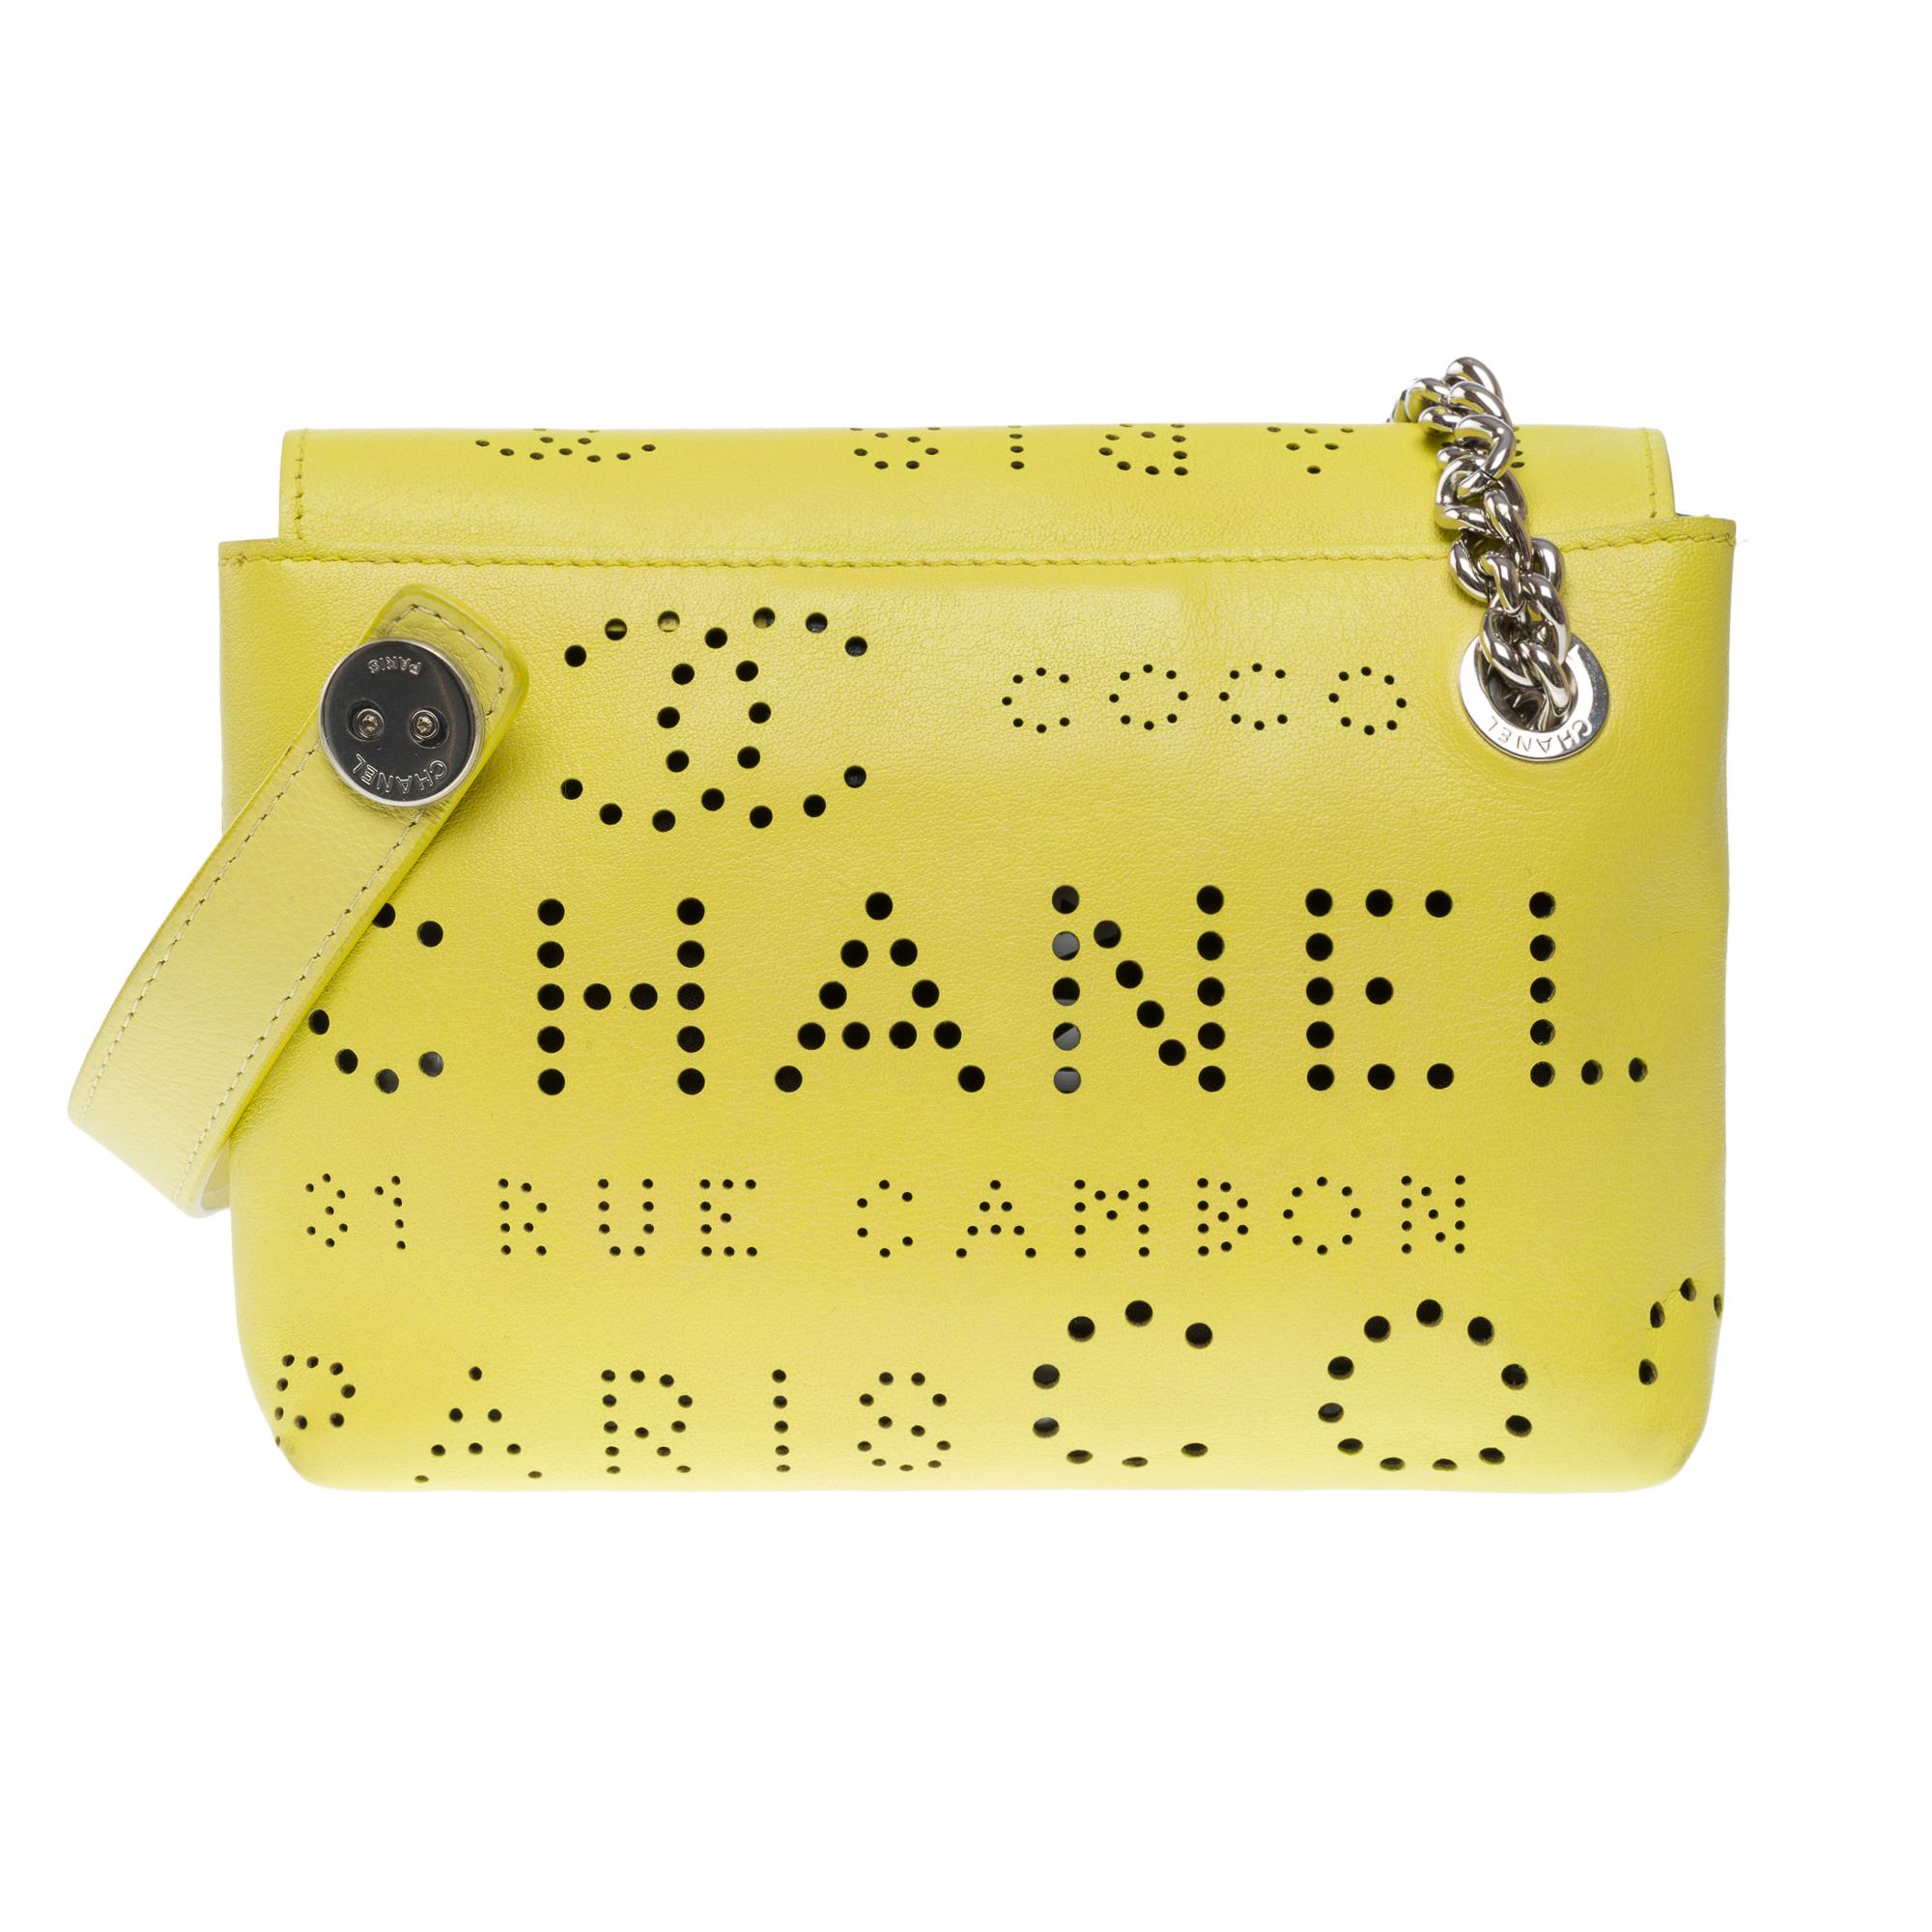 Chanel Classic shoulder flap bag in Yellow perforated leather, SHW 1